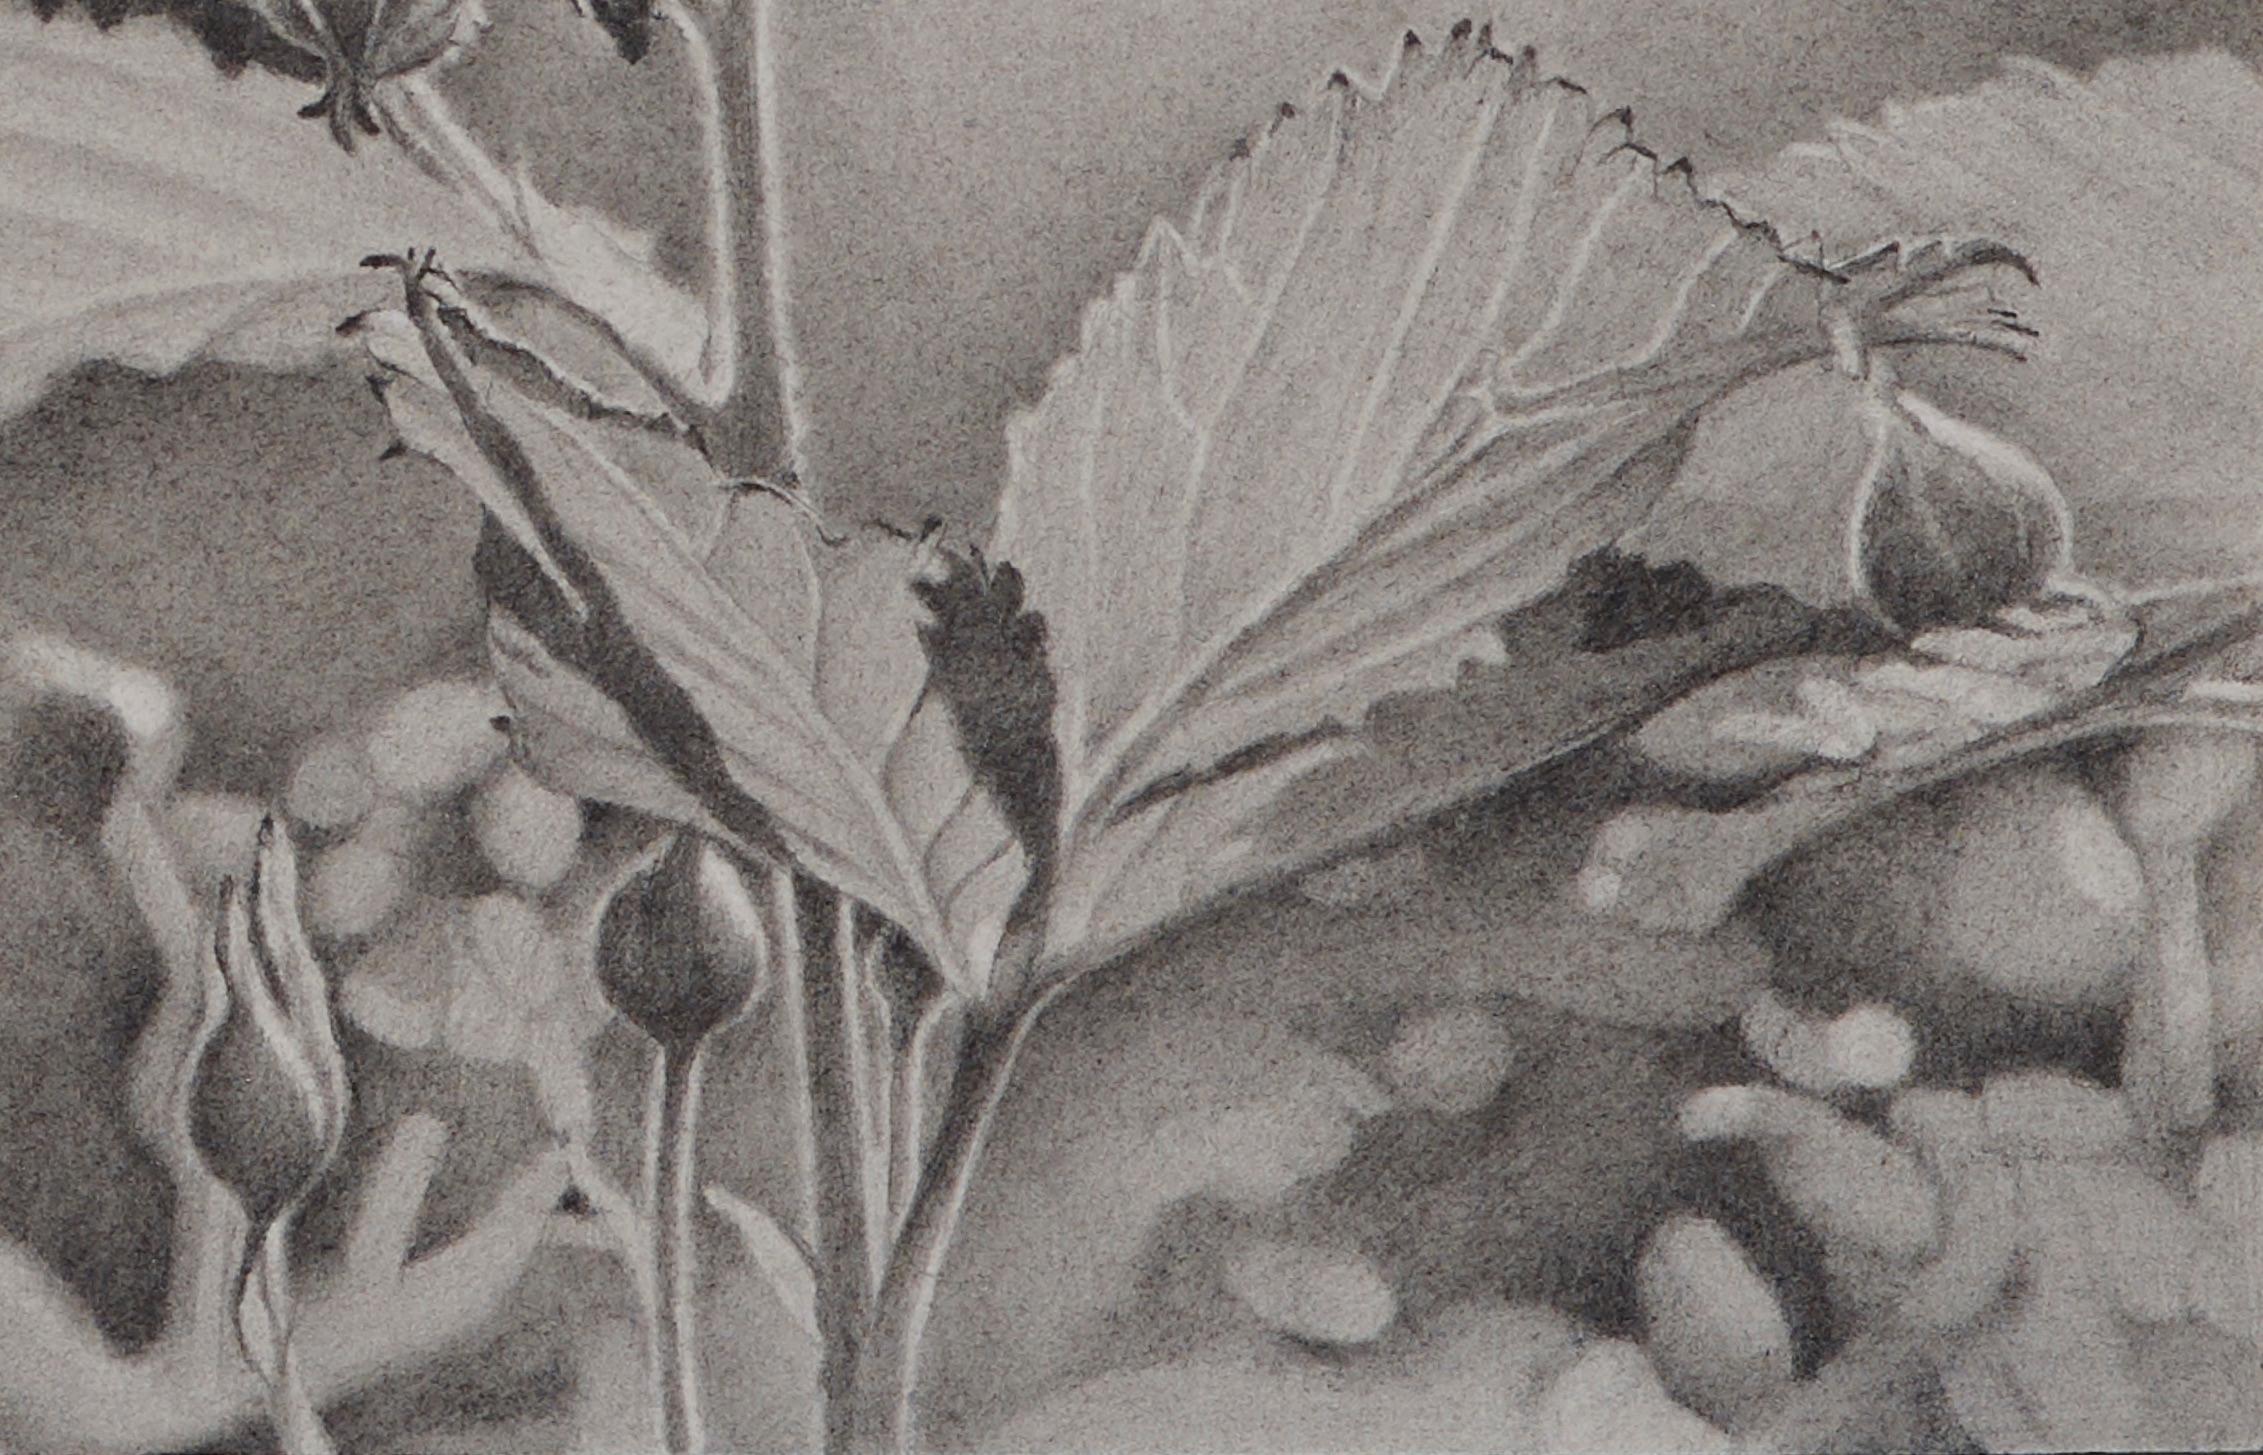 Buds and Leaves, photorealist graphite floral drawing, 2018 - Art by Mary Reilly